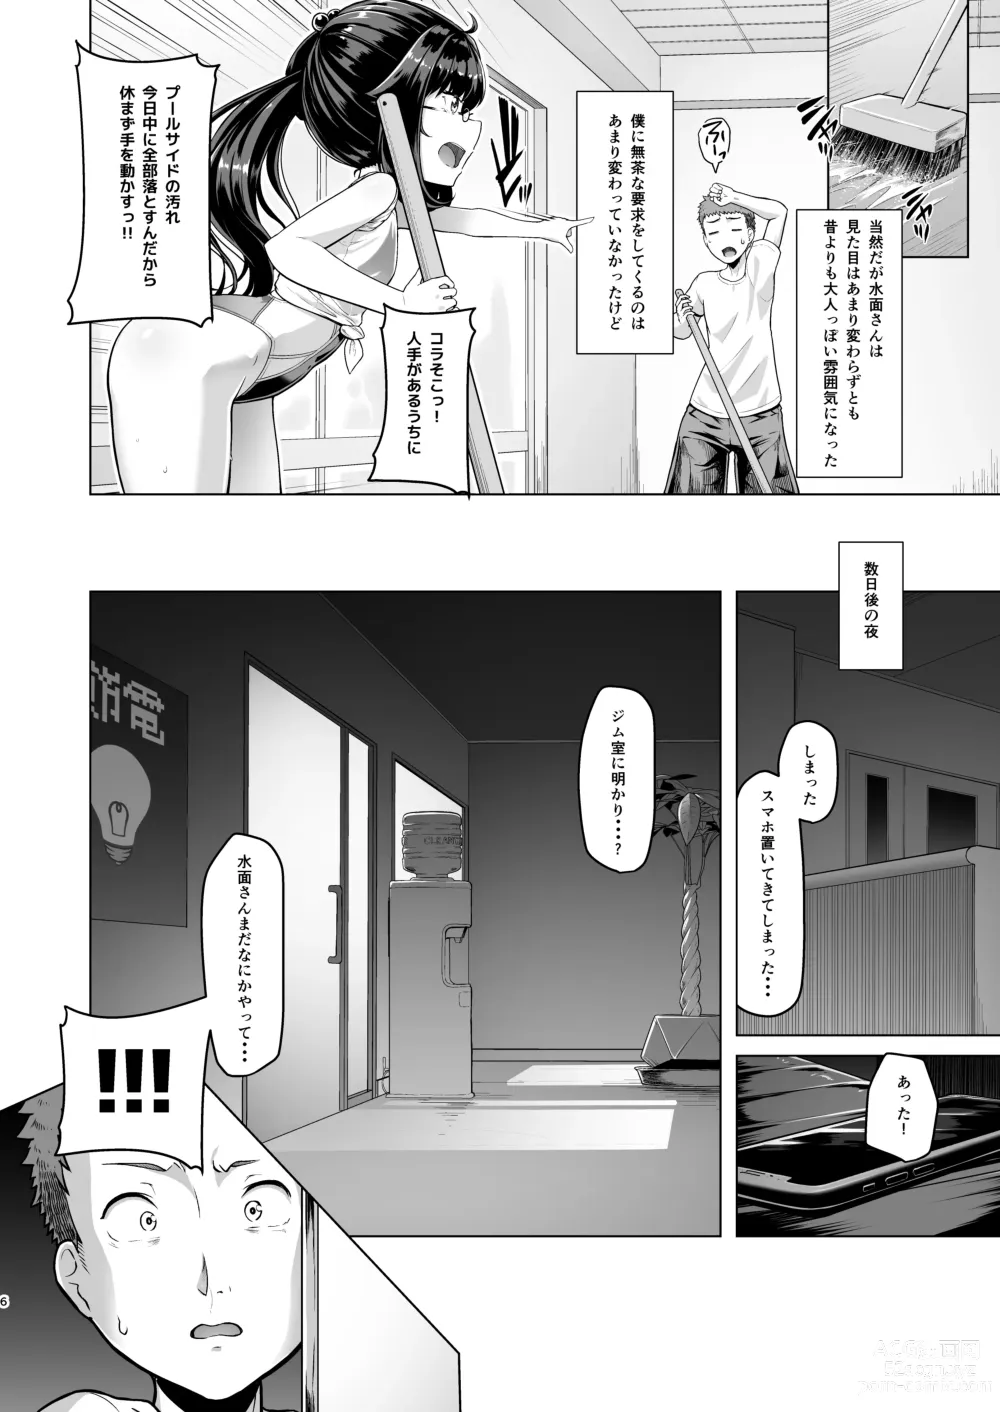 Page 5 of doujinshi 僕だけが知っている深夜の水面